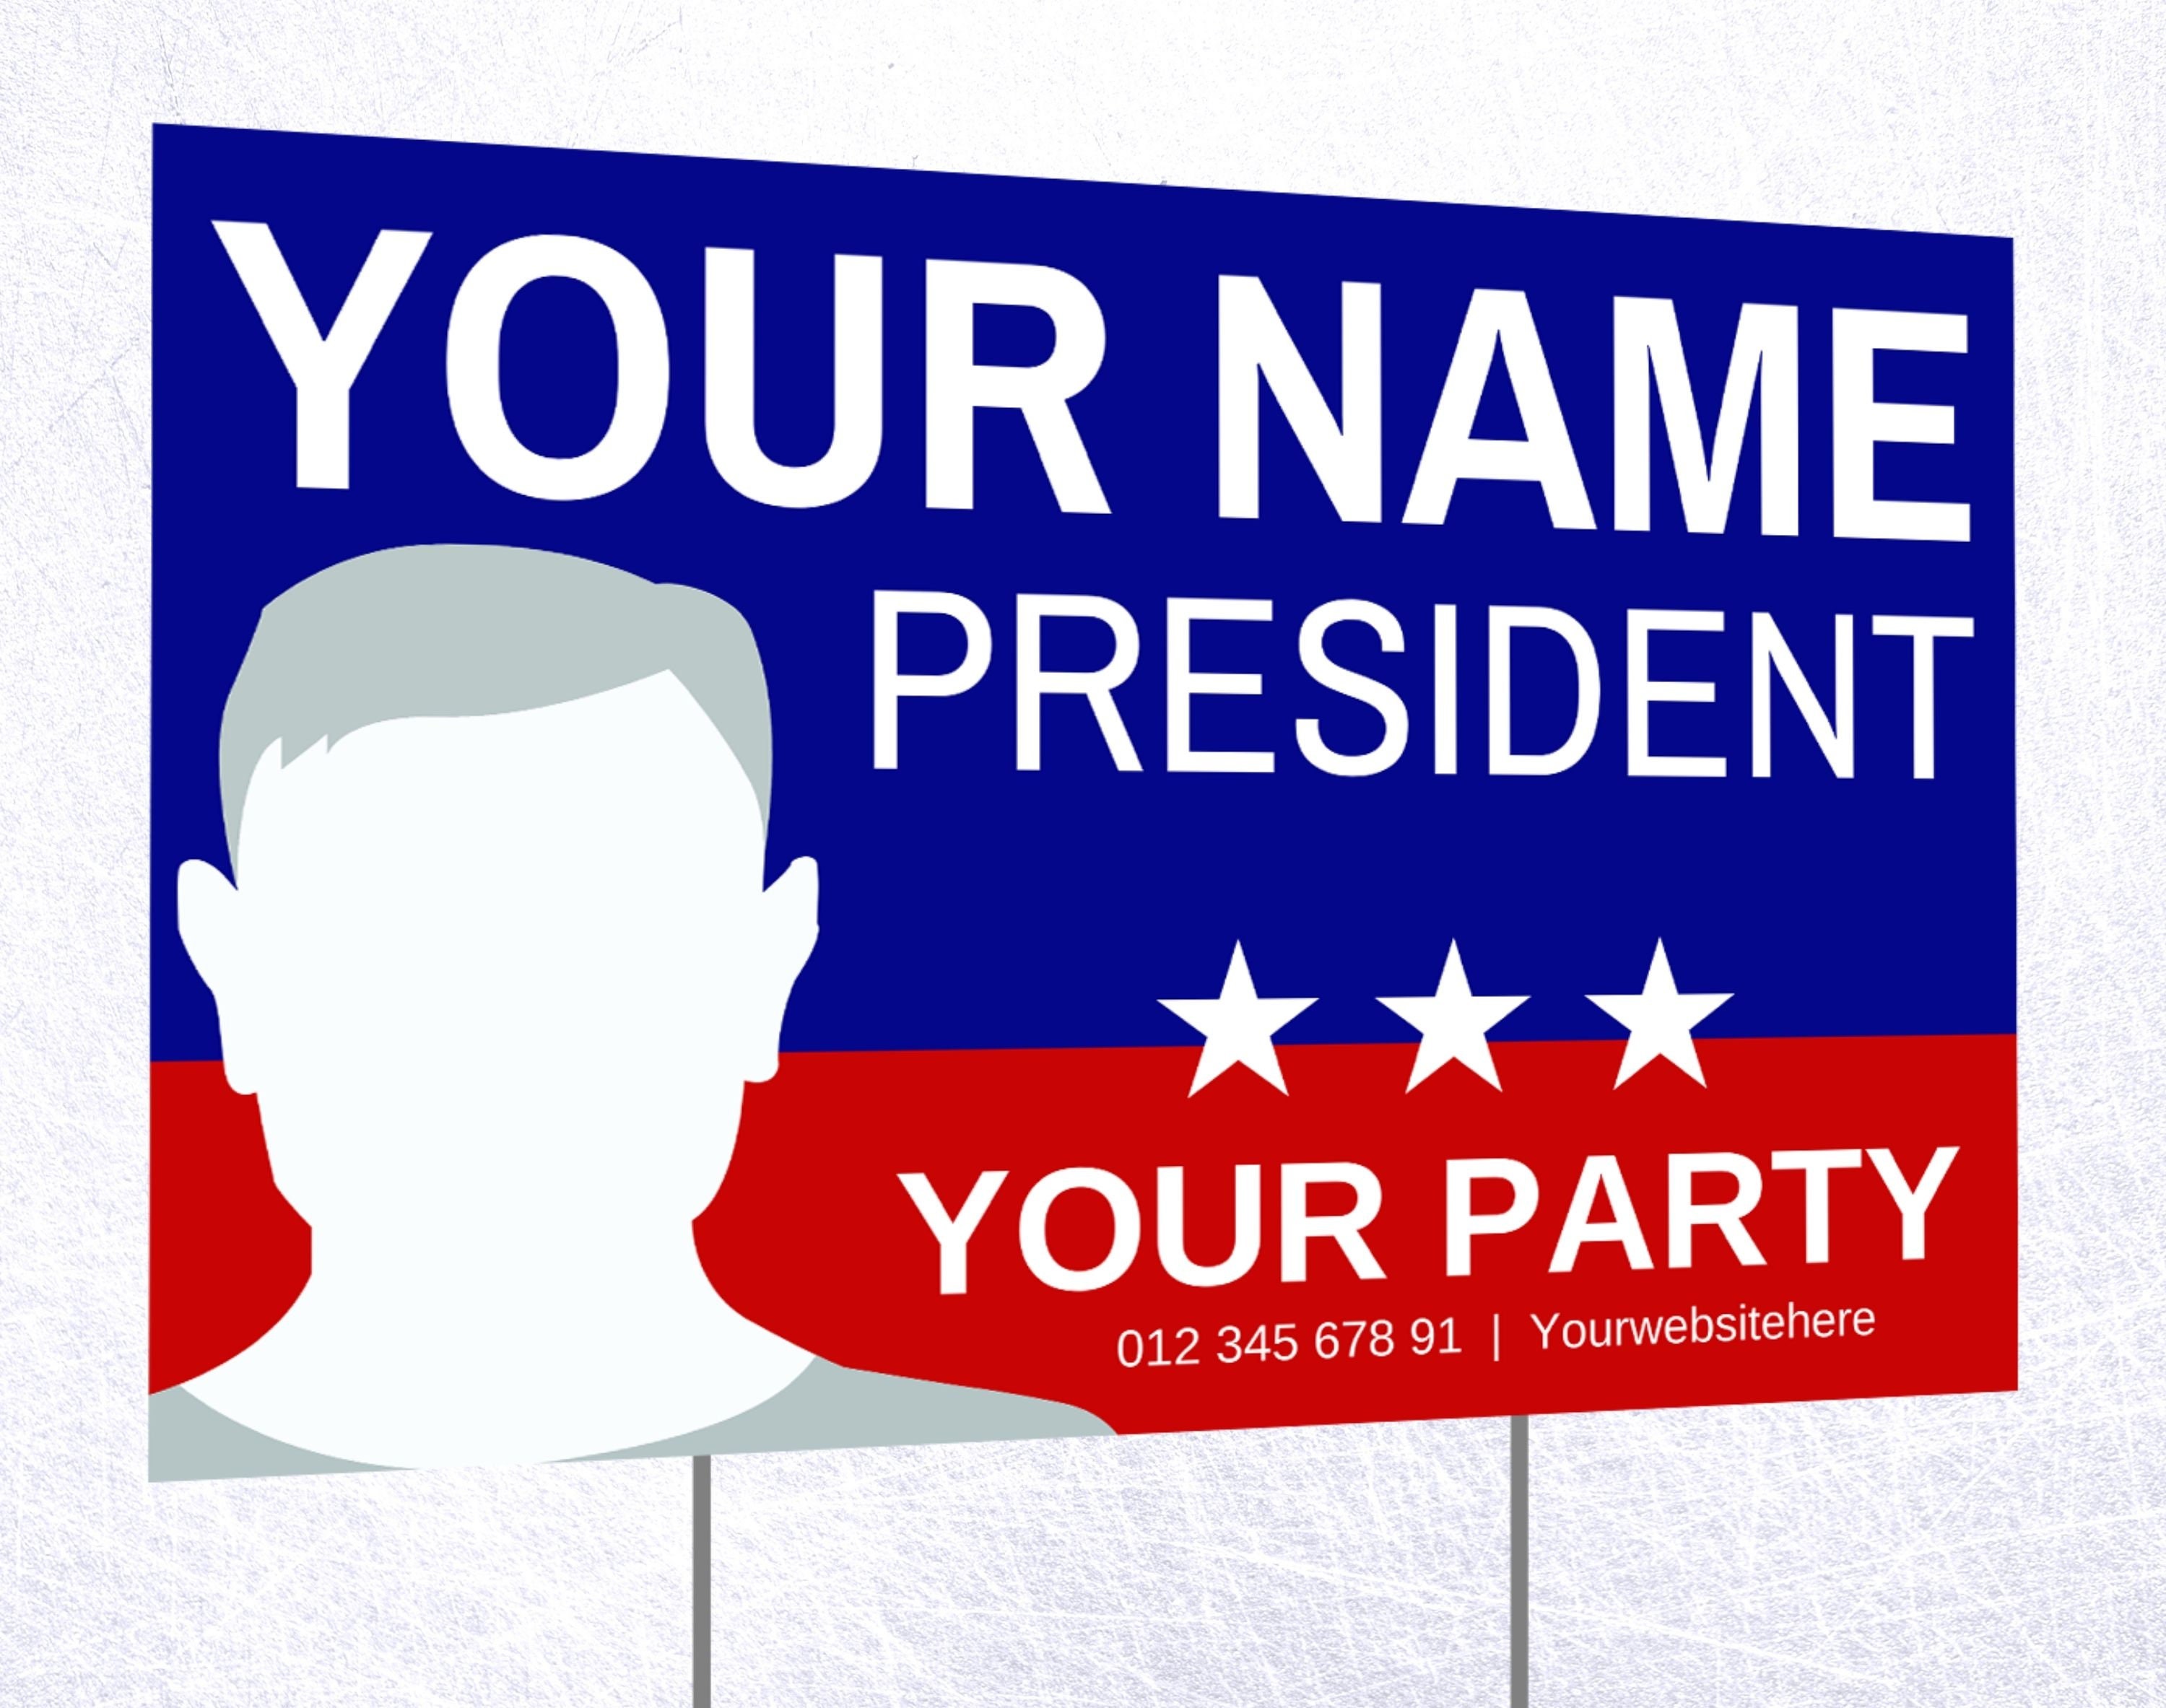 vote-for-me-banner-canva-template-election-poster-united-states-of-america-political-party